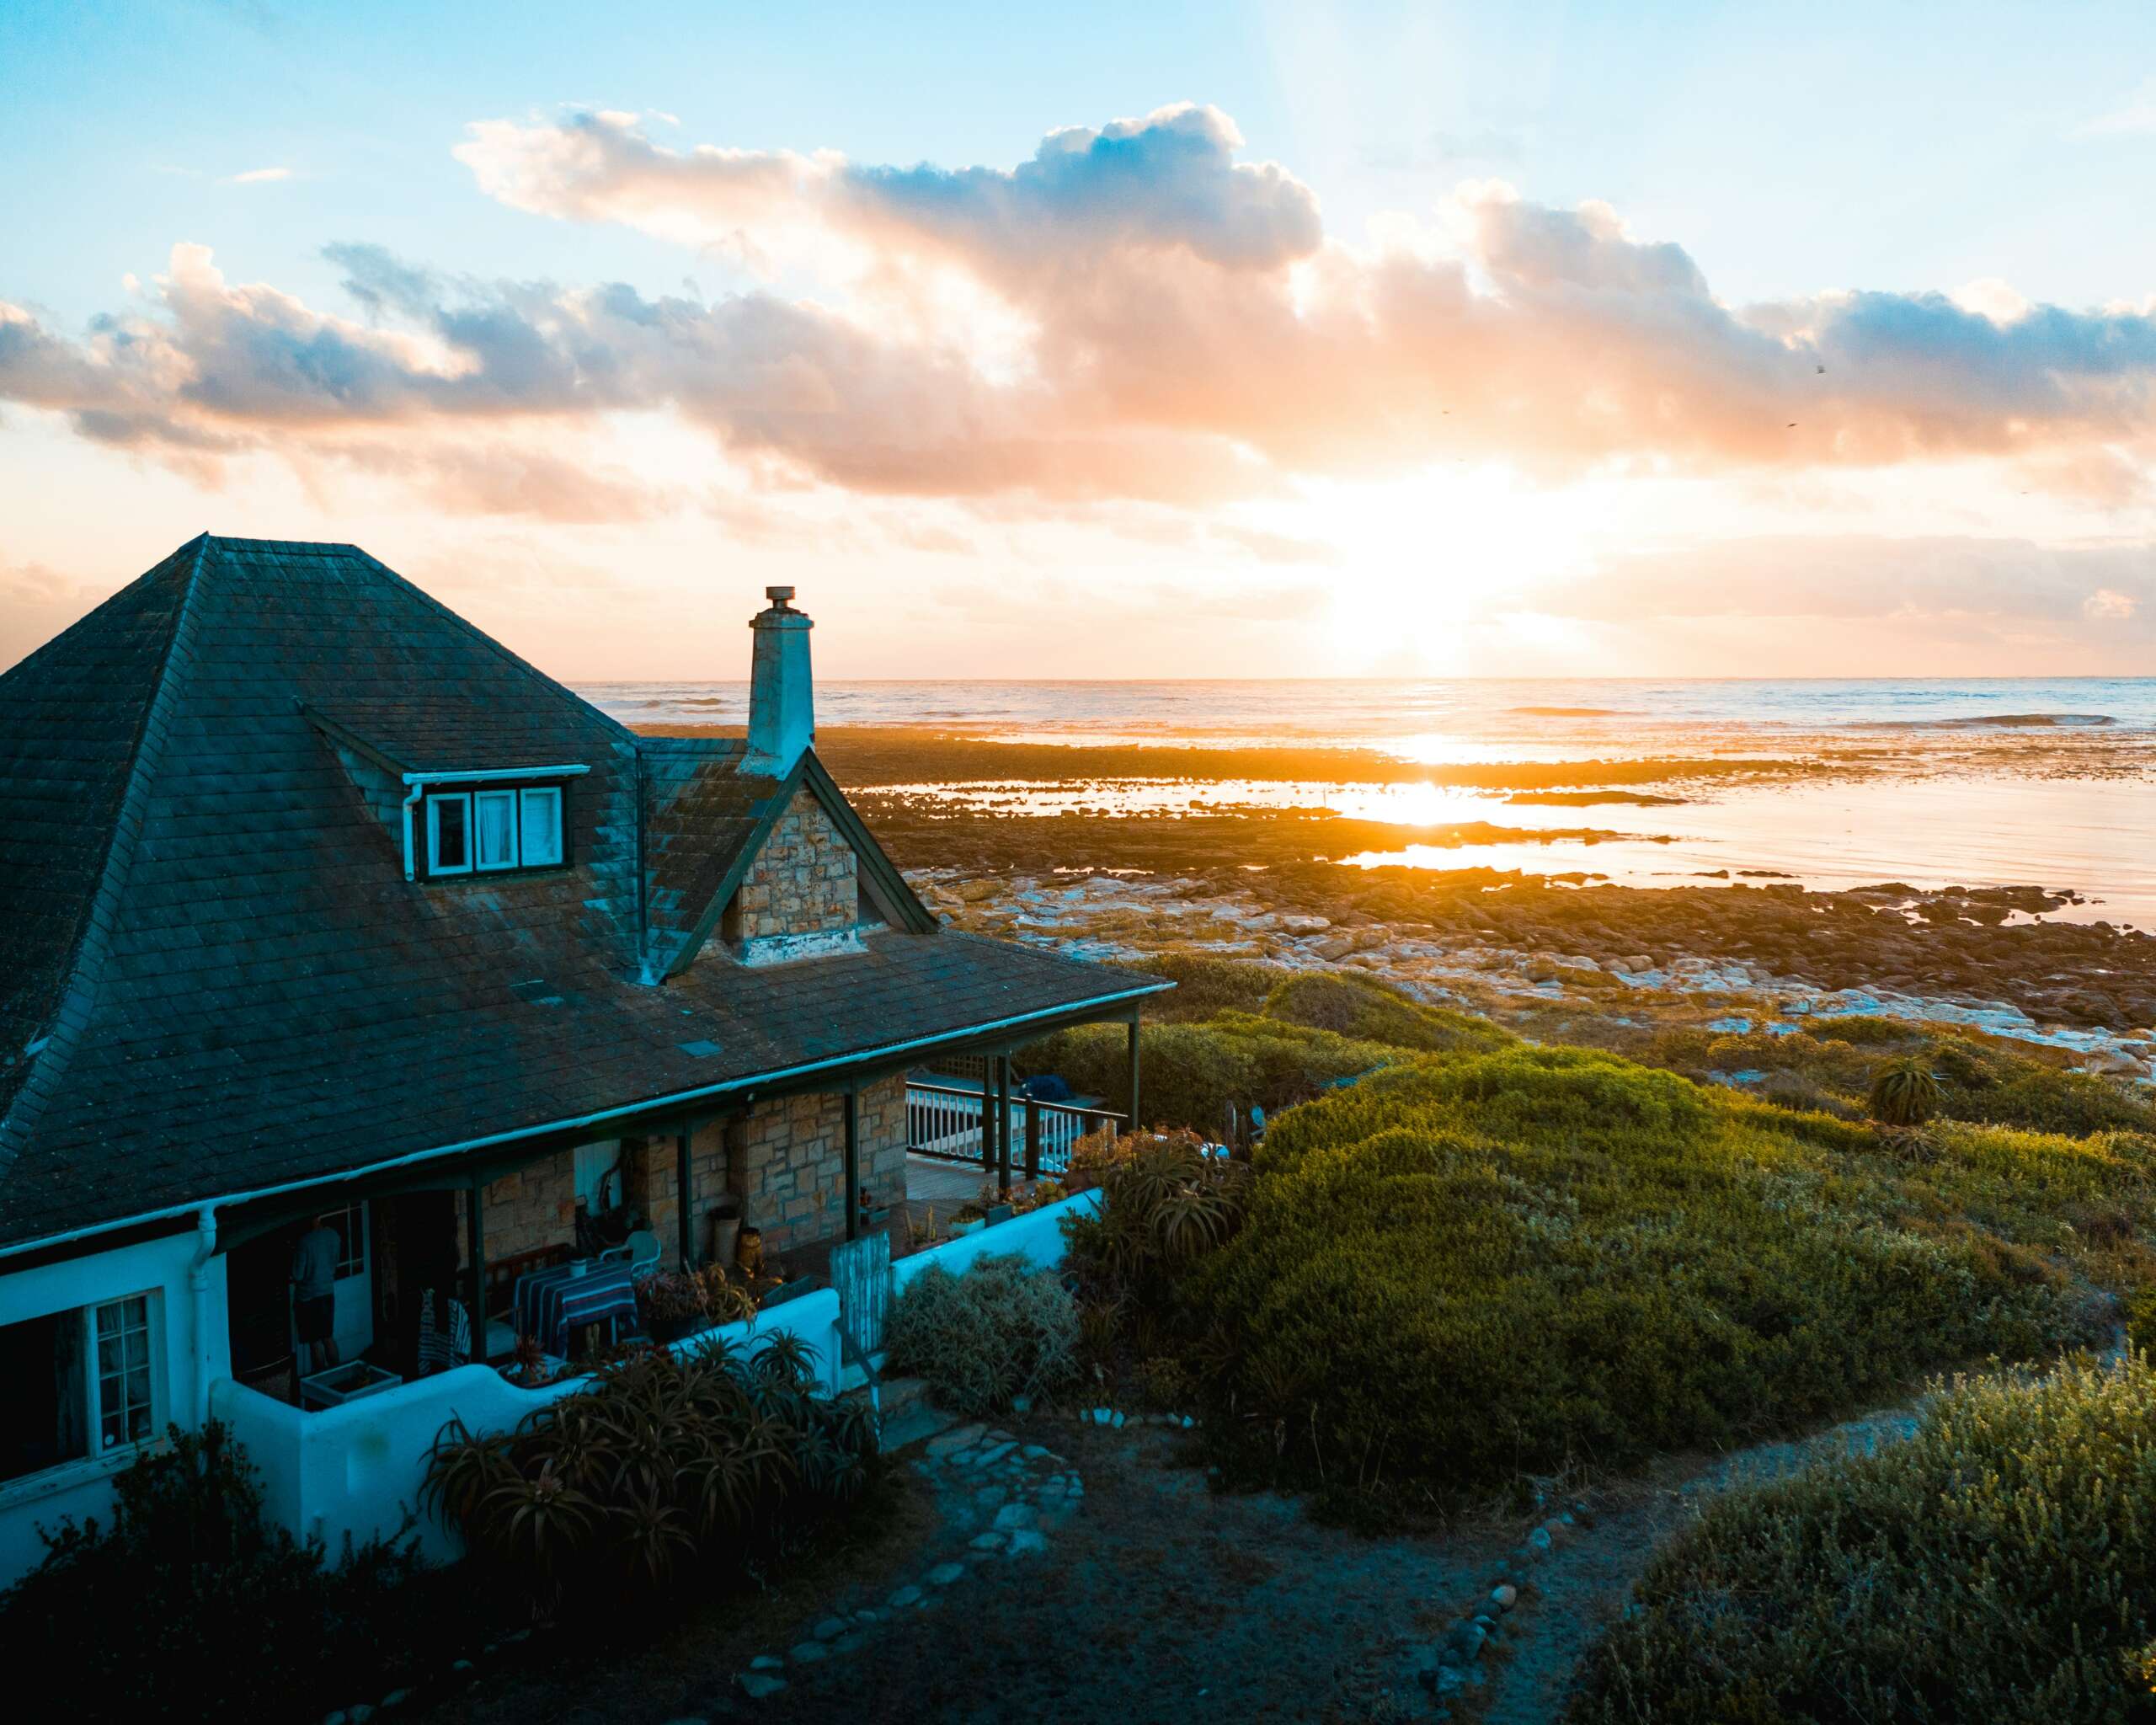 An image of a beautiful home located by the beach with a sunset in the background.